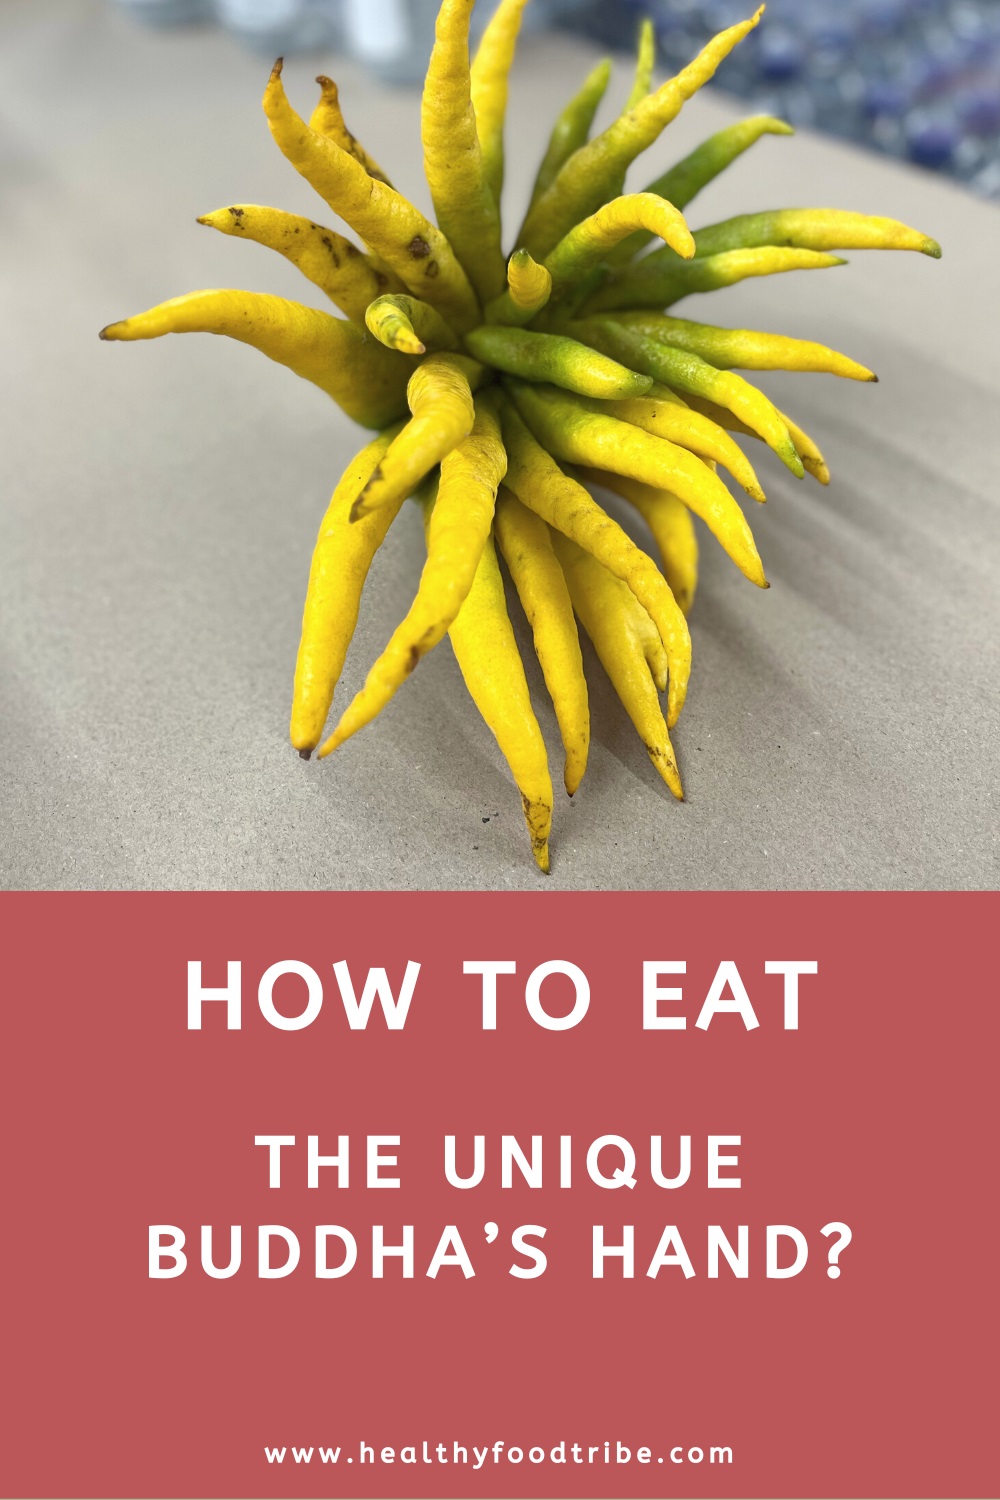 How to eat the unique Buddha's hand